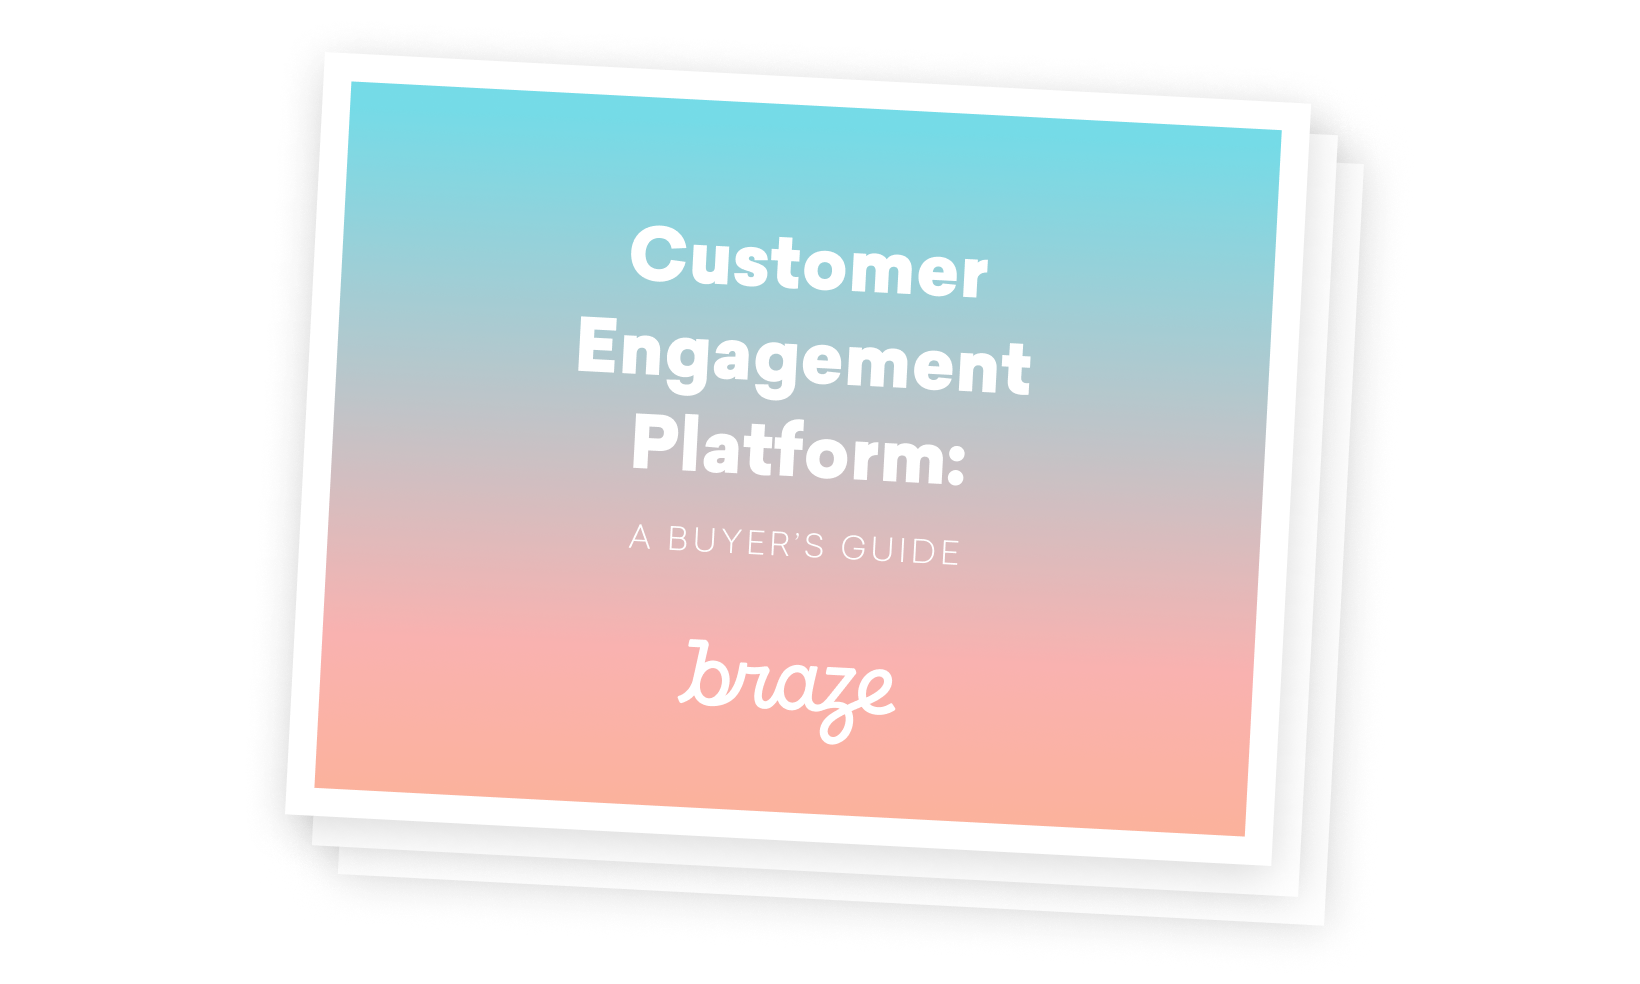 Customer Engagement Platforms: A Buyer's Guide